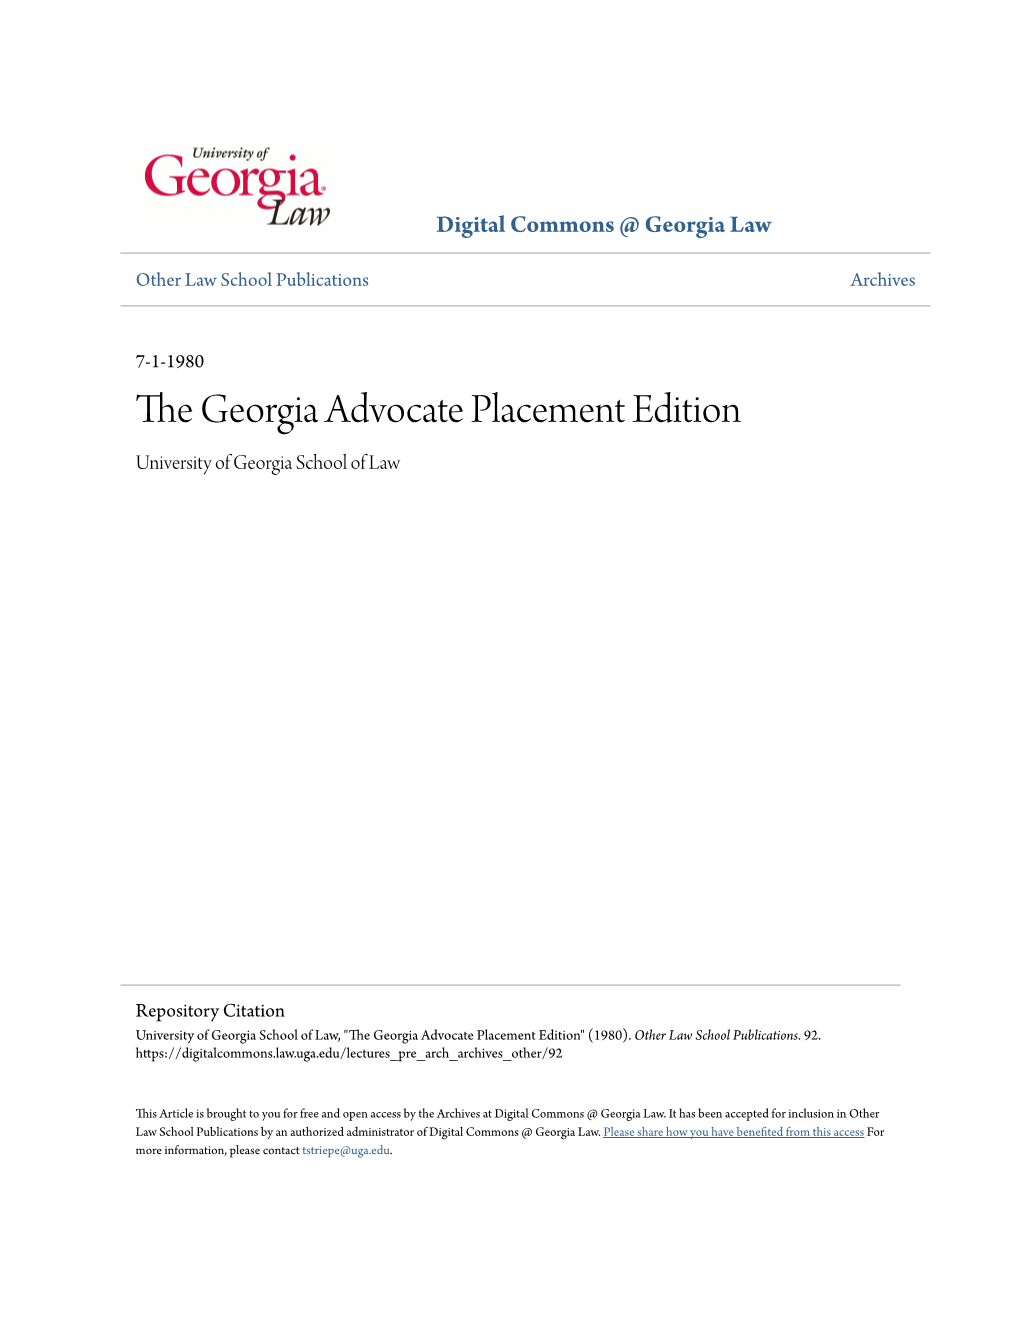 The Georgia Advocate Placement Edition University of Georgia School of Law